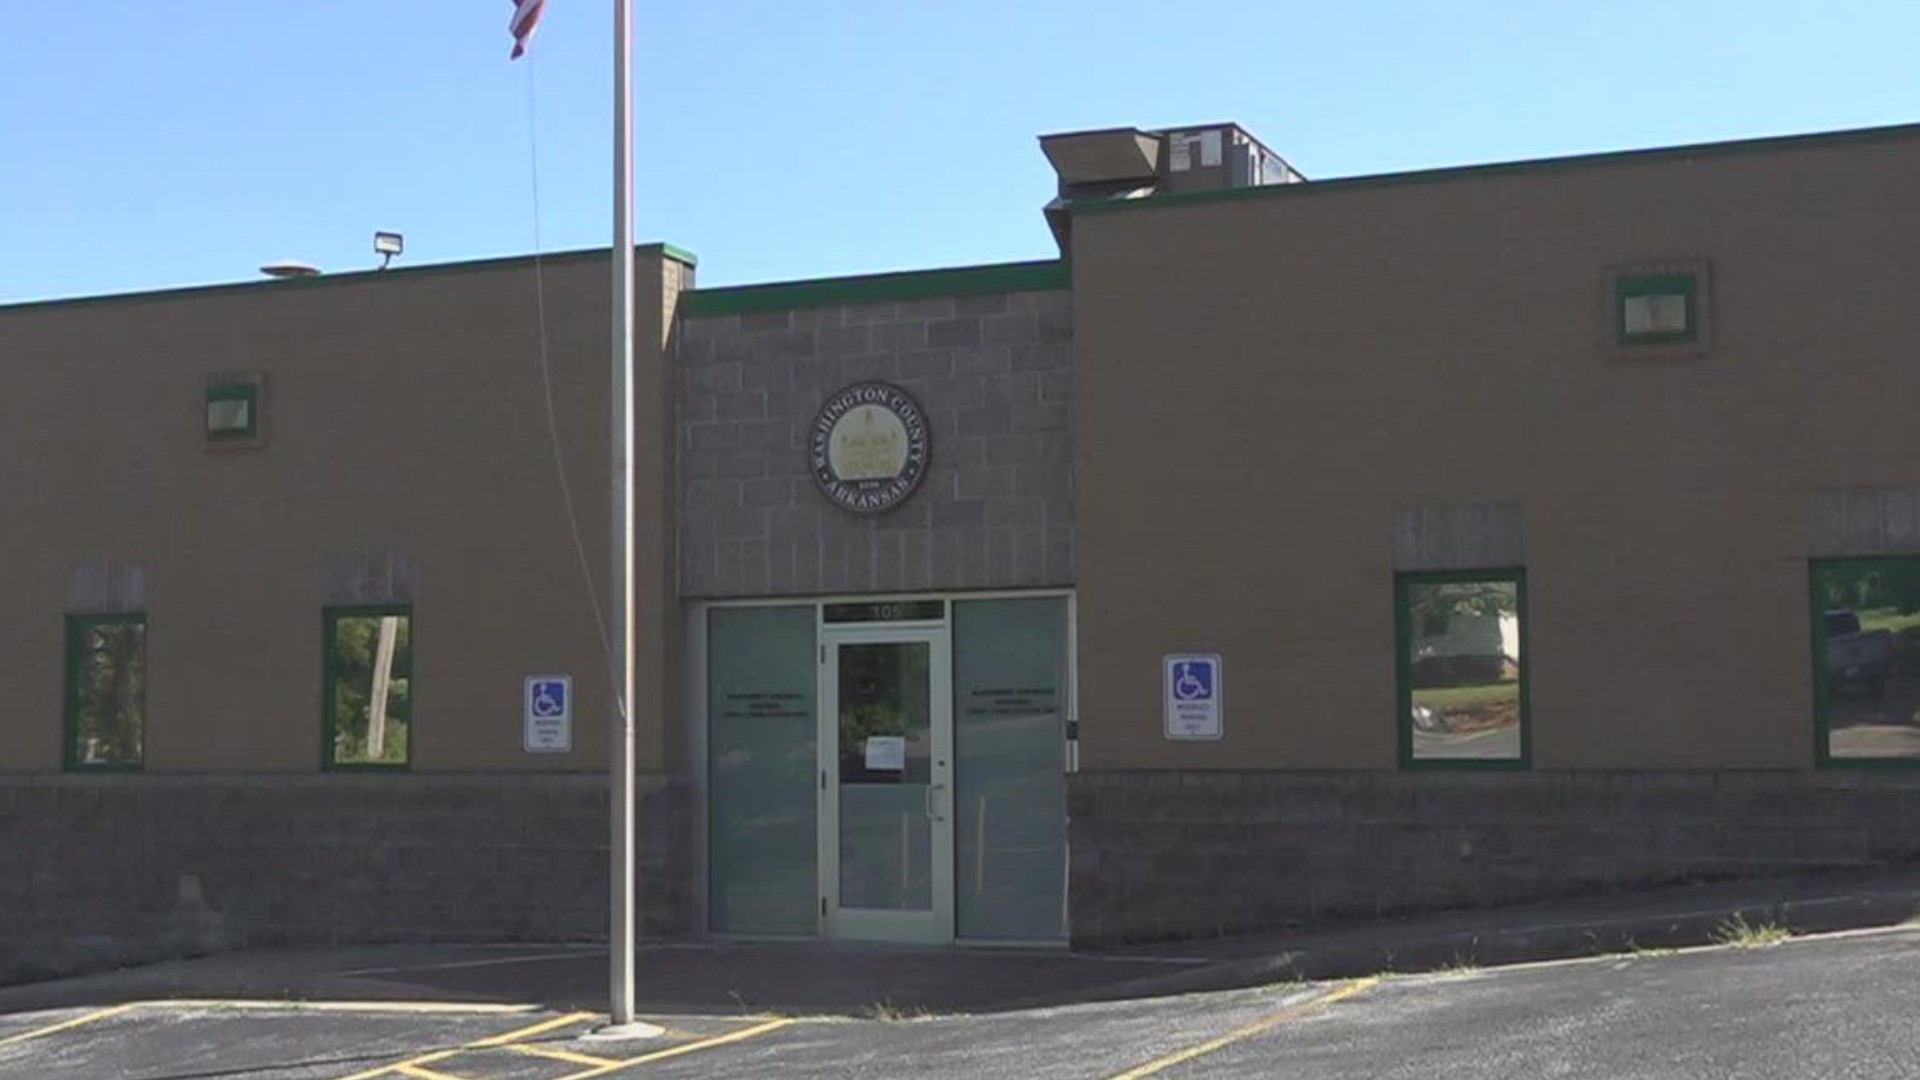 After closing last year, the Washington County Crisis Stabilization Unit is reopening its doors with a new provider in charge.